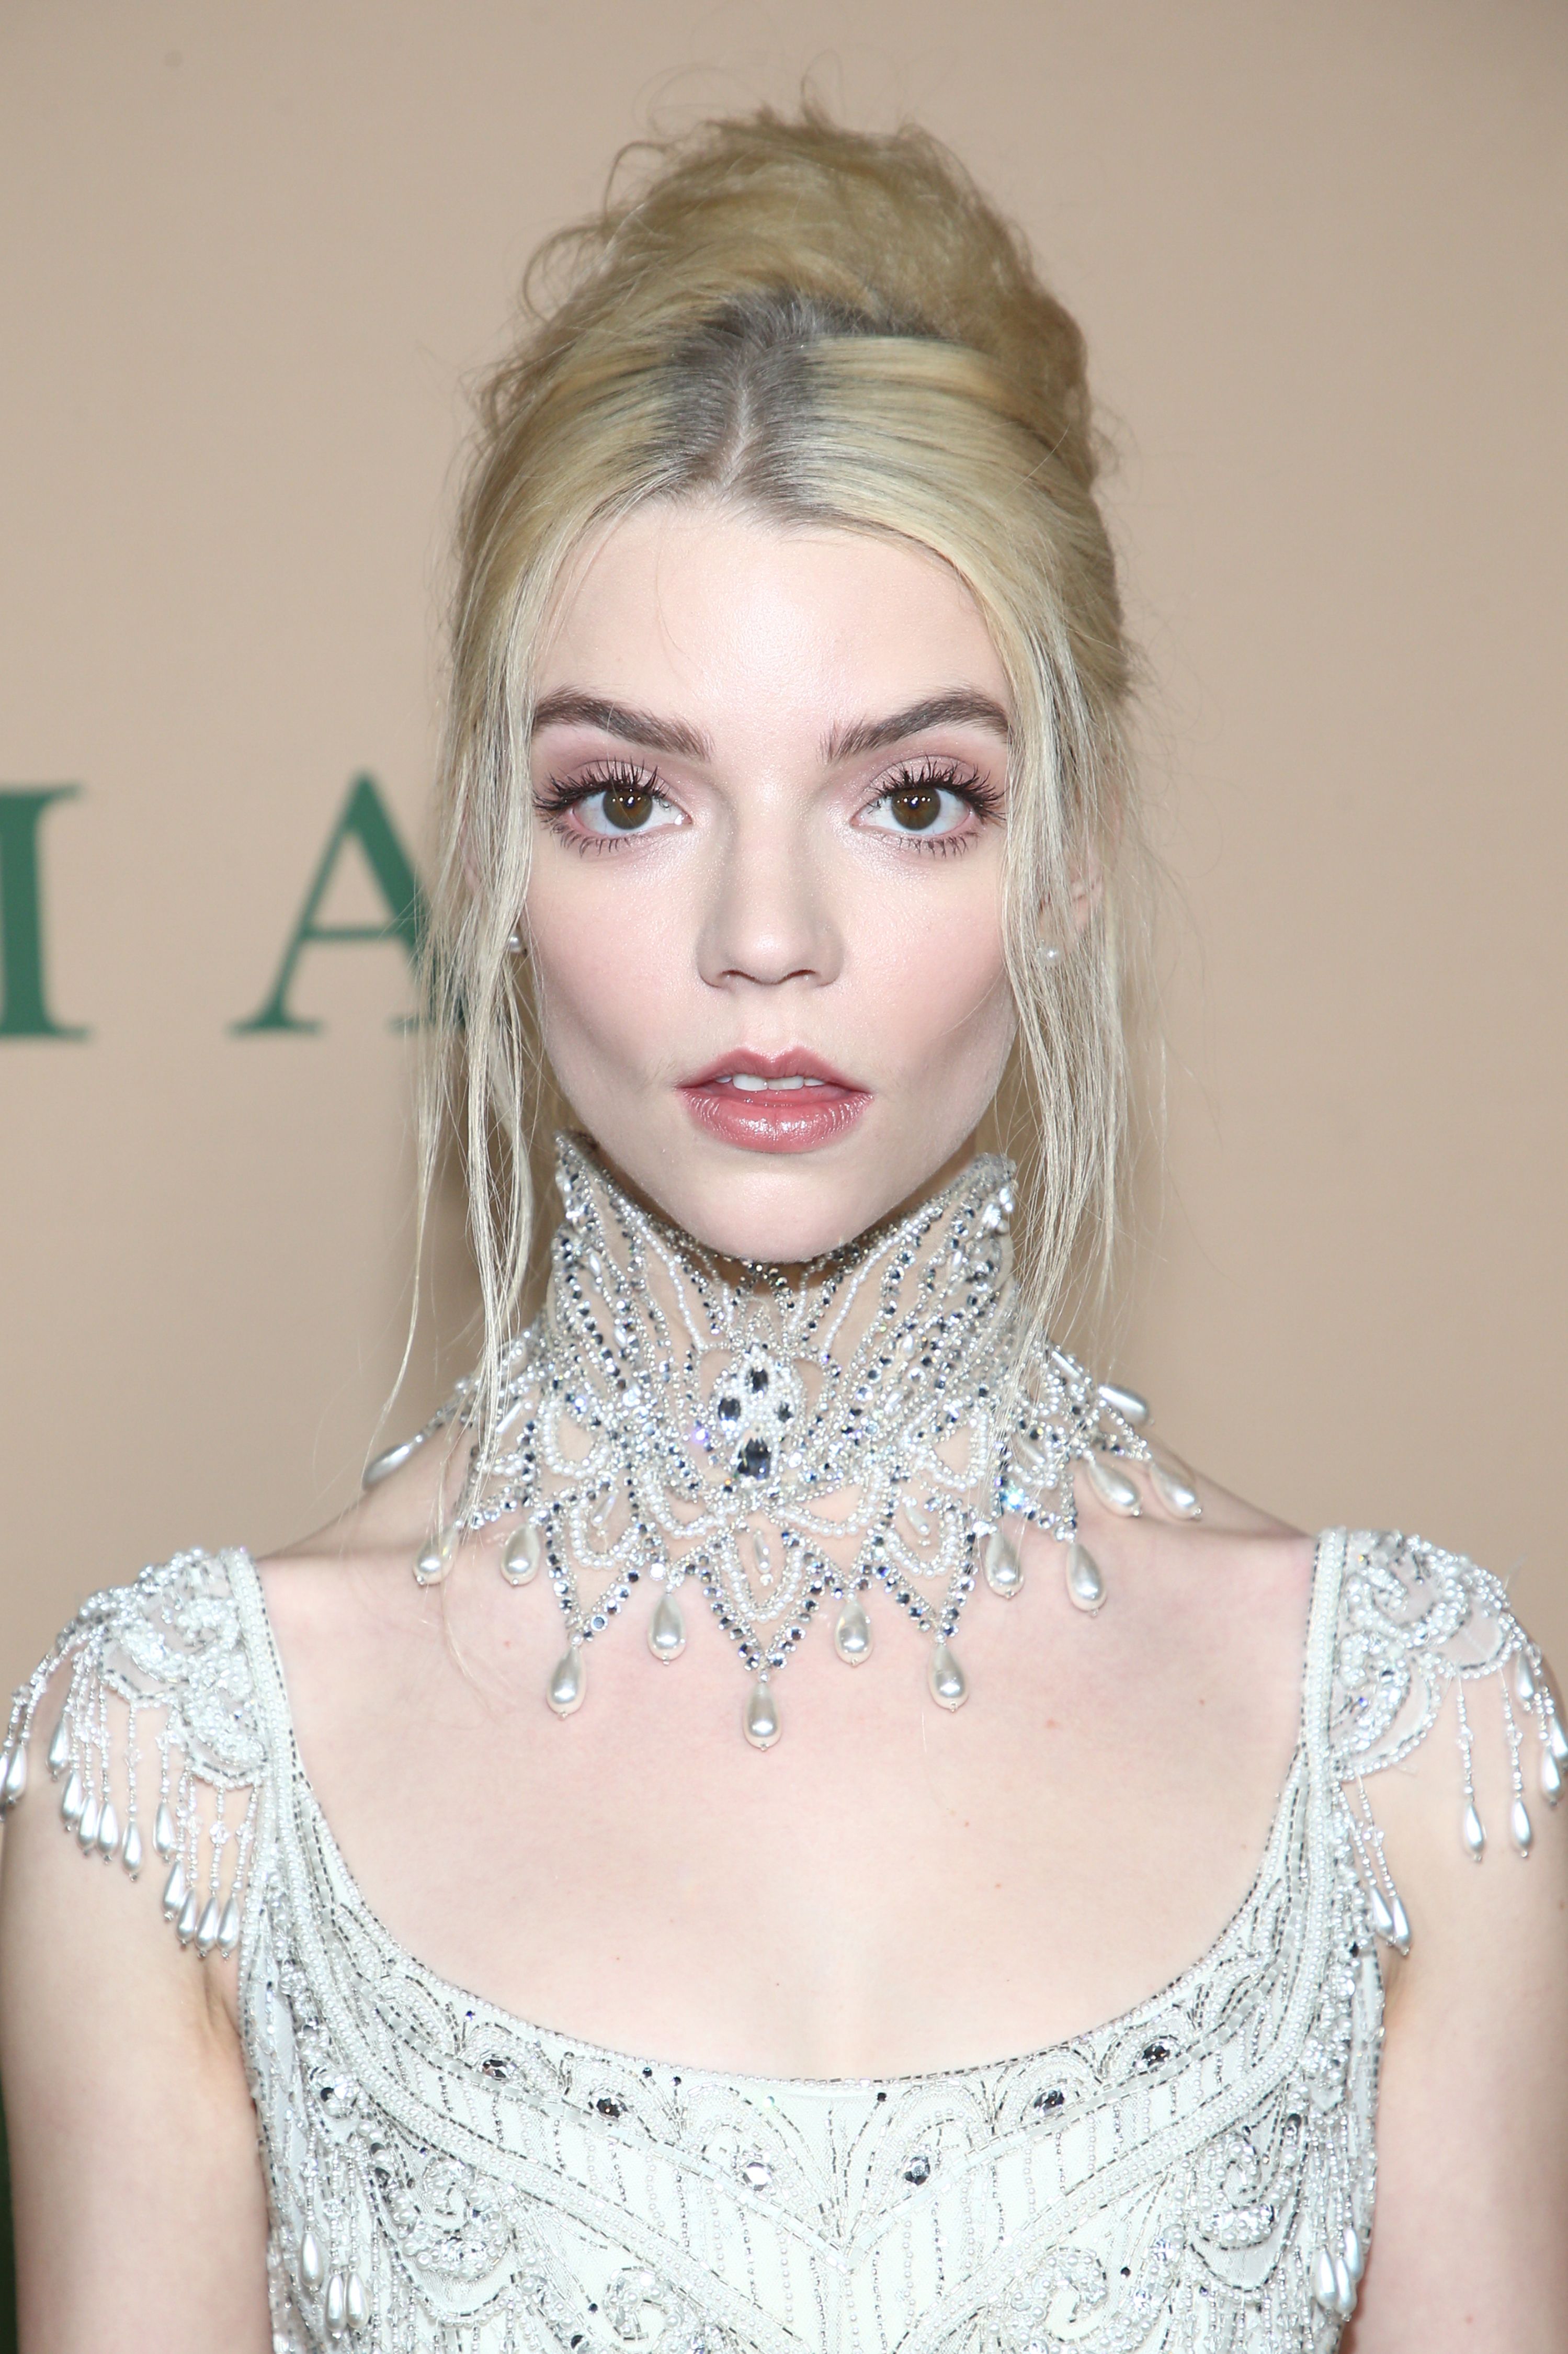 Emmy Nominee Anya Taylor-Joy Once Revealed That She Doesn't